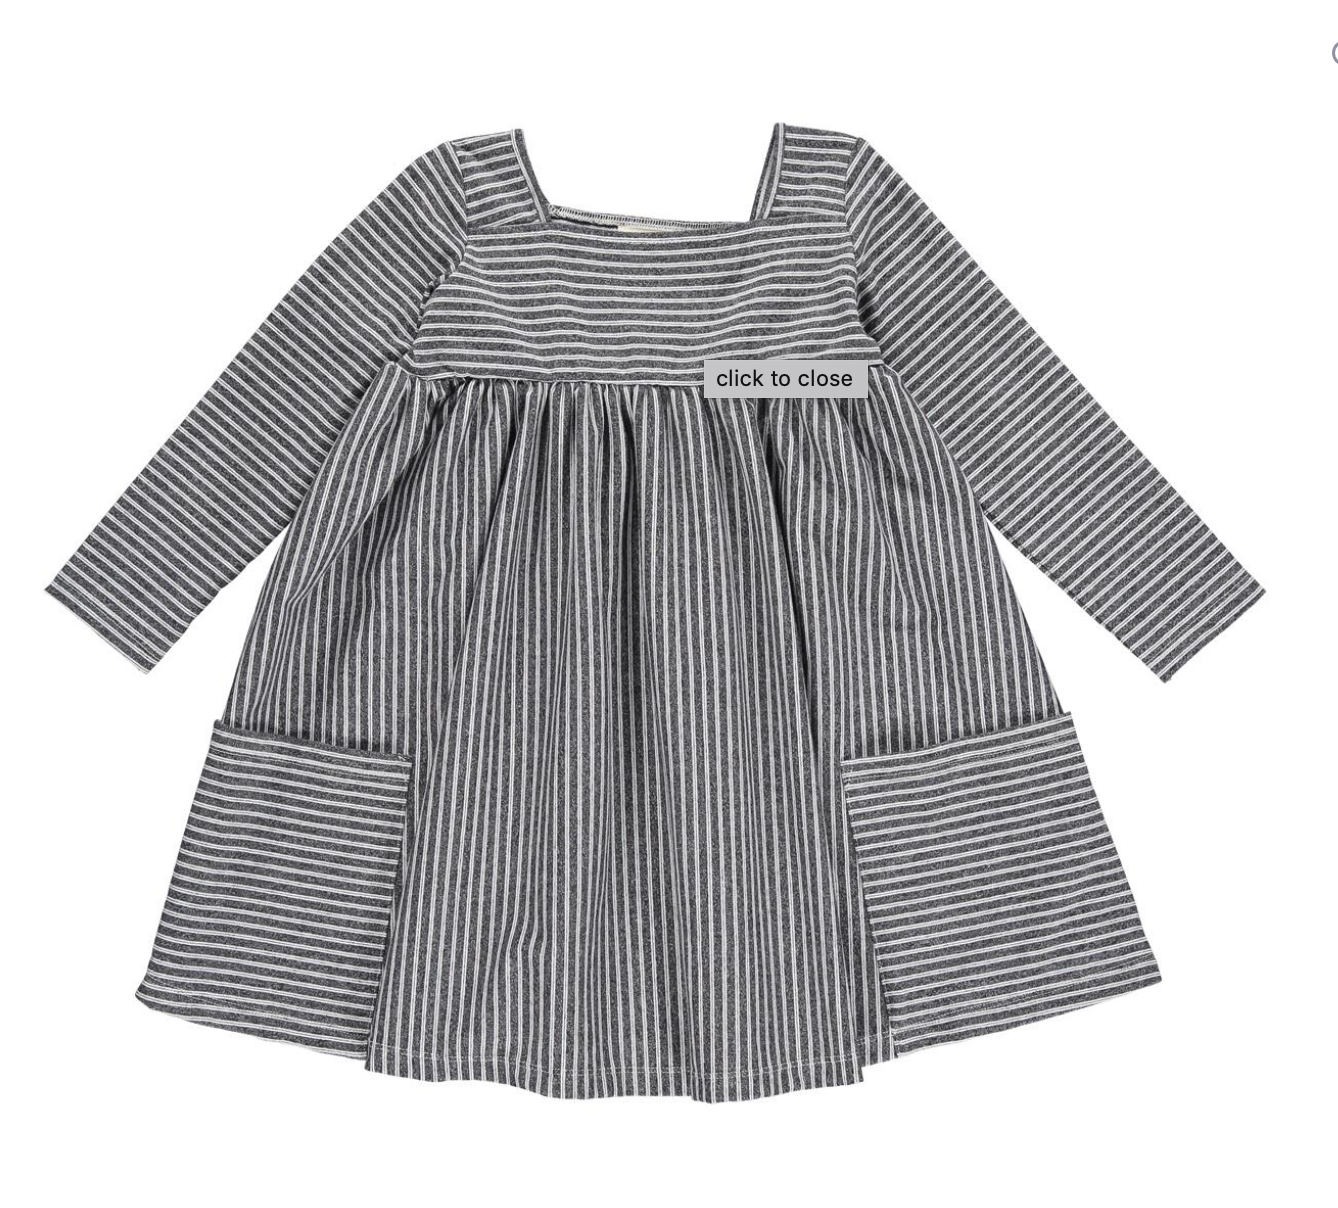 Rylie Dress in Charcoal